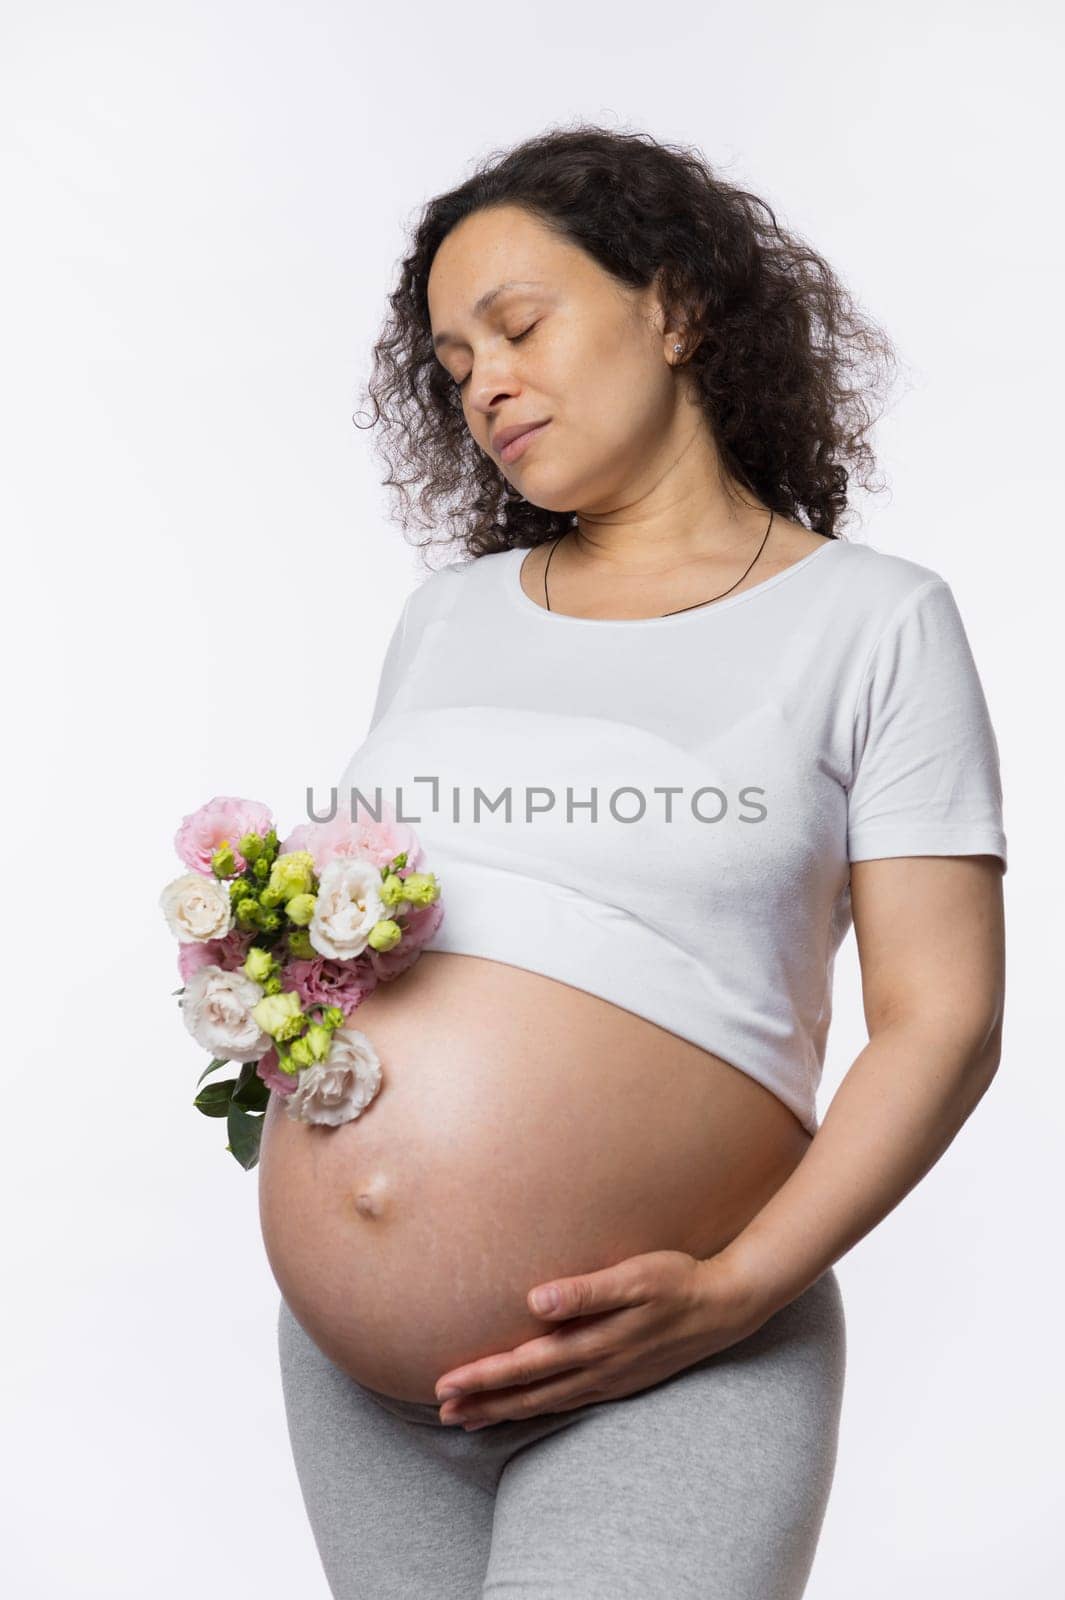 Studio portrait serene pretty pregnant woman with her eyes closed, holding bouquet of flowers in hand near her belly, gently stroking her tummy, isolated on white background. Happy pregnancy concept